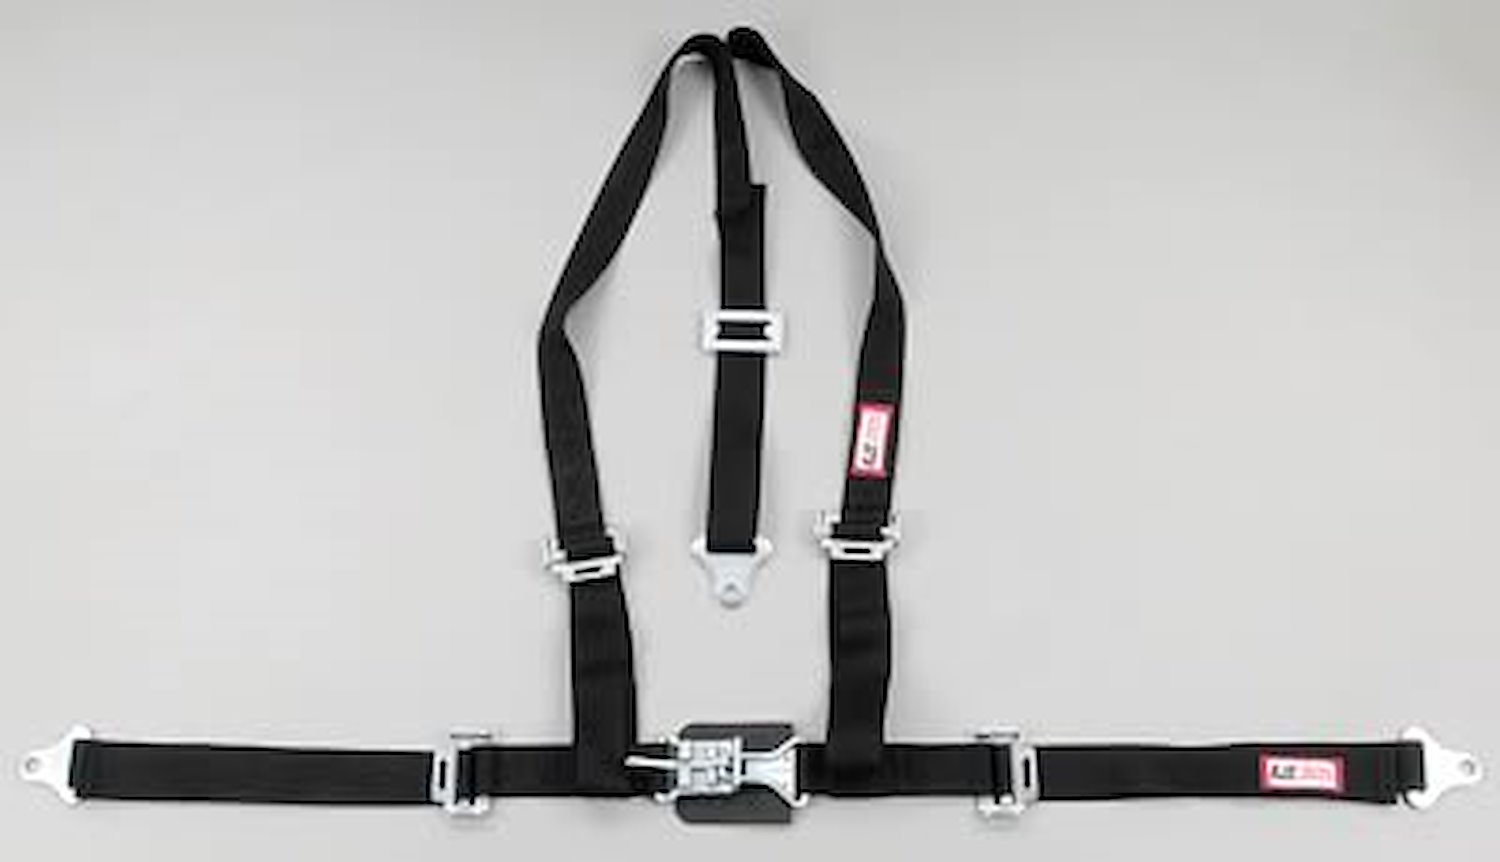 NON-SFI L&L HARNESS 3 PULL DOWN Lap Belt w/adjuster SNAP 2 S.H. Individual FLOOR Mount w/STERNUM STRAP WRAP/BOLT RED